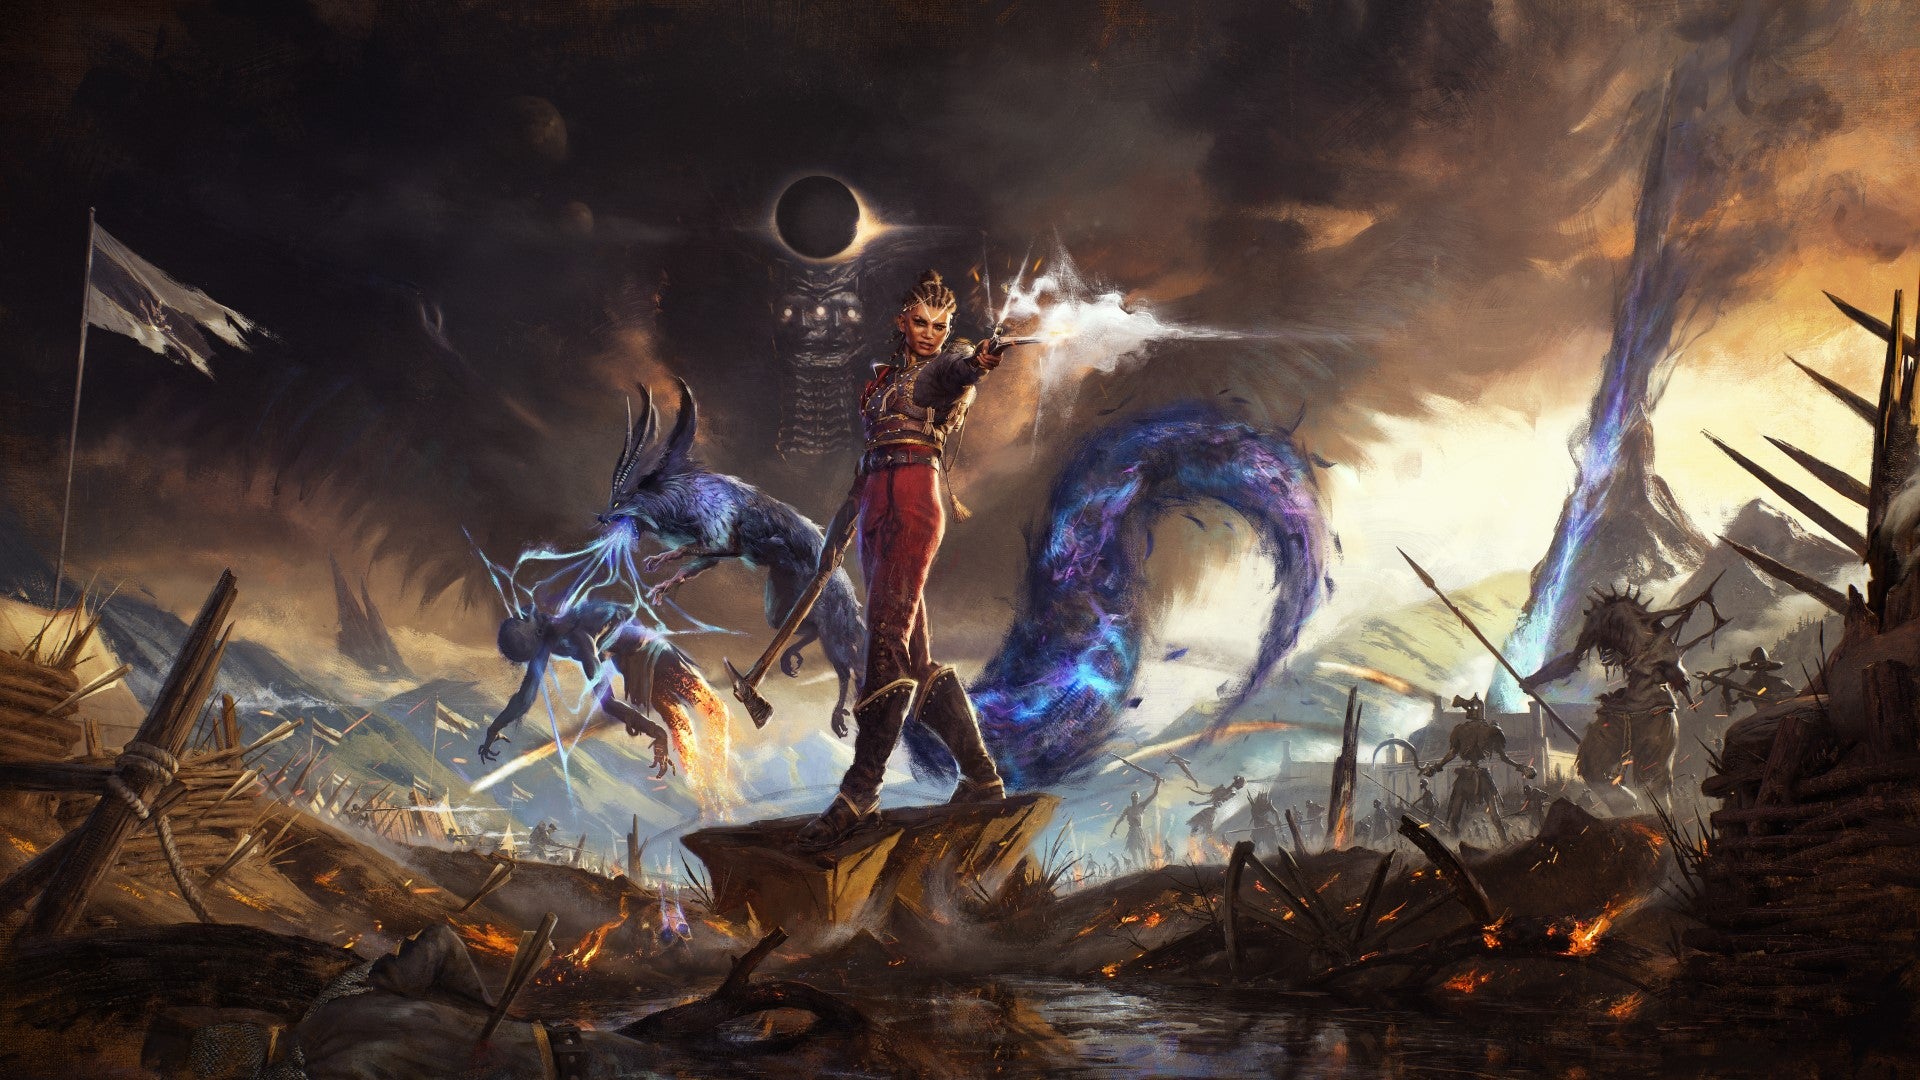 Flintlock: The Siege Of Dawn's key art, which shows Nor and Enki fighting on a ravaged battlefield.